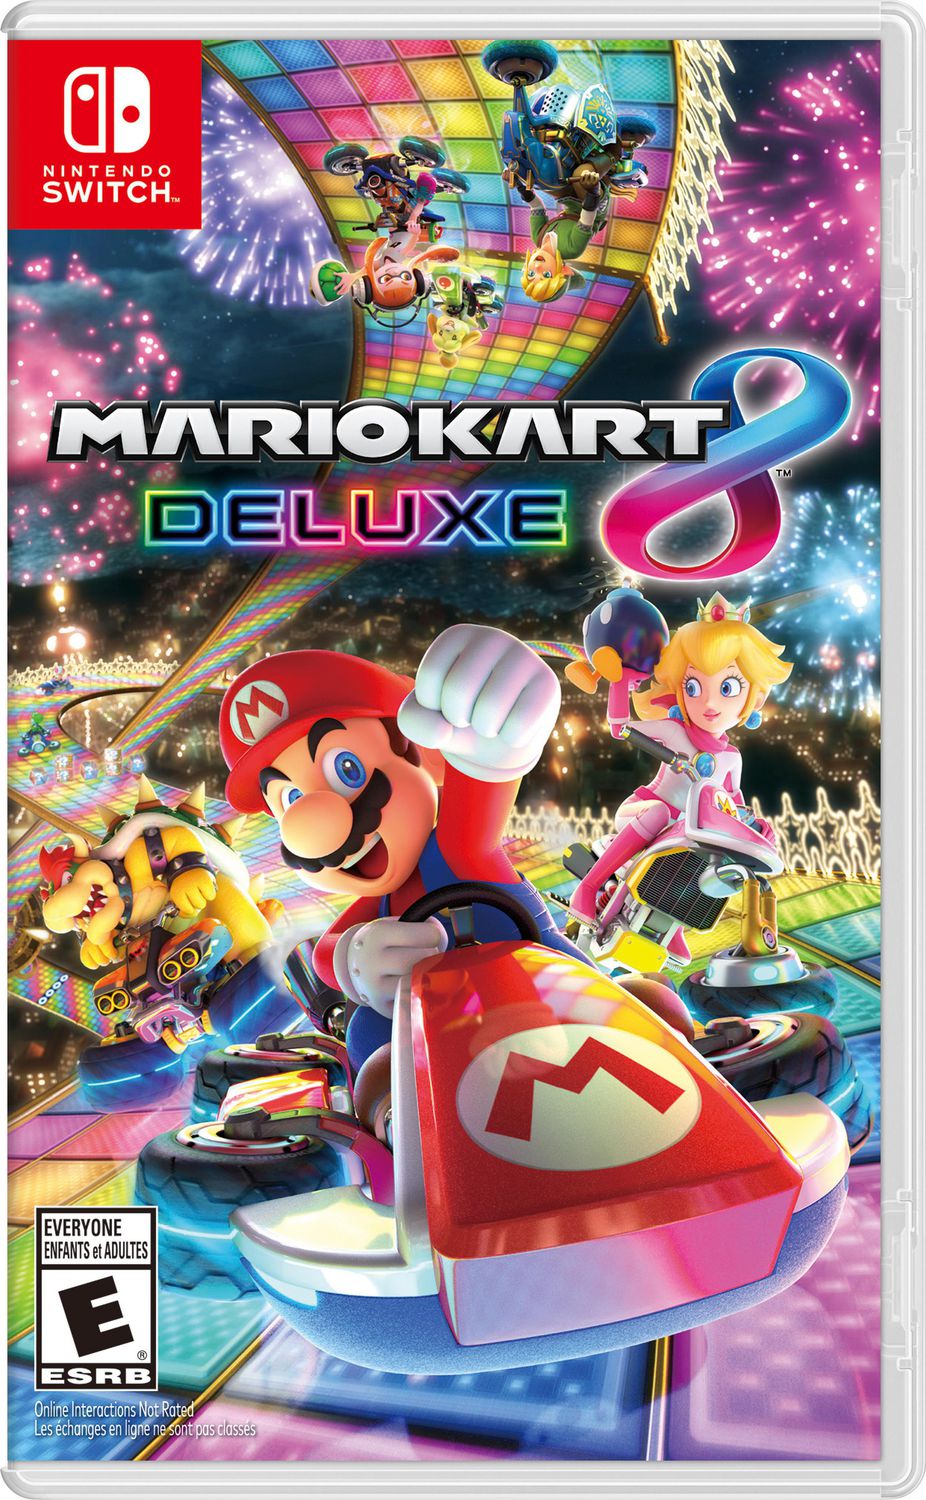 Screw the Xbox series x, or ps5, what Mario kart pack are you